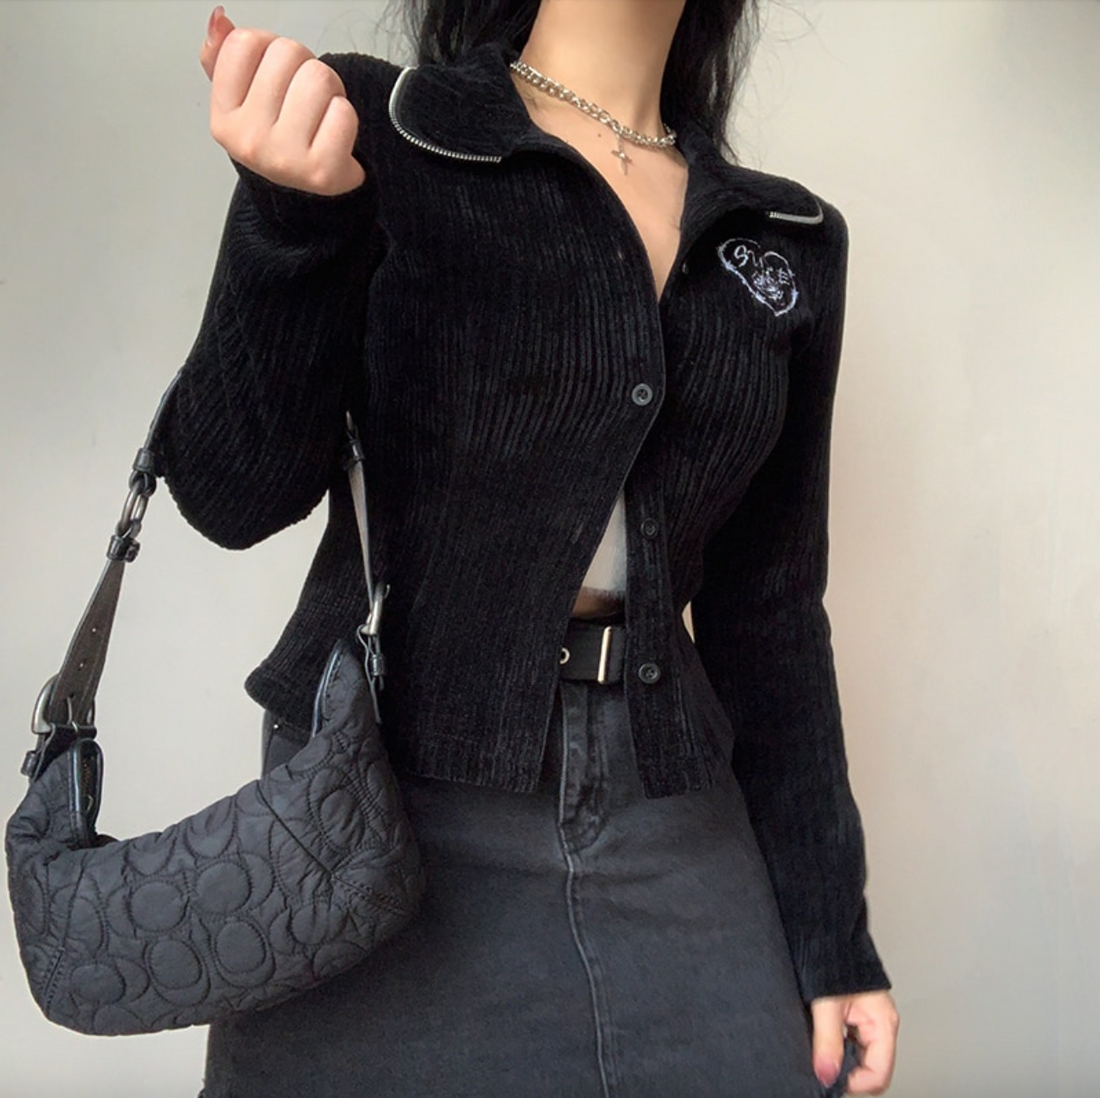 Women's Spring/Autumn Gothic Embroider Knitted Casual Preppy Style Coat